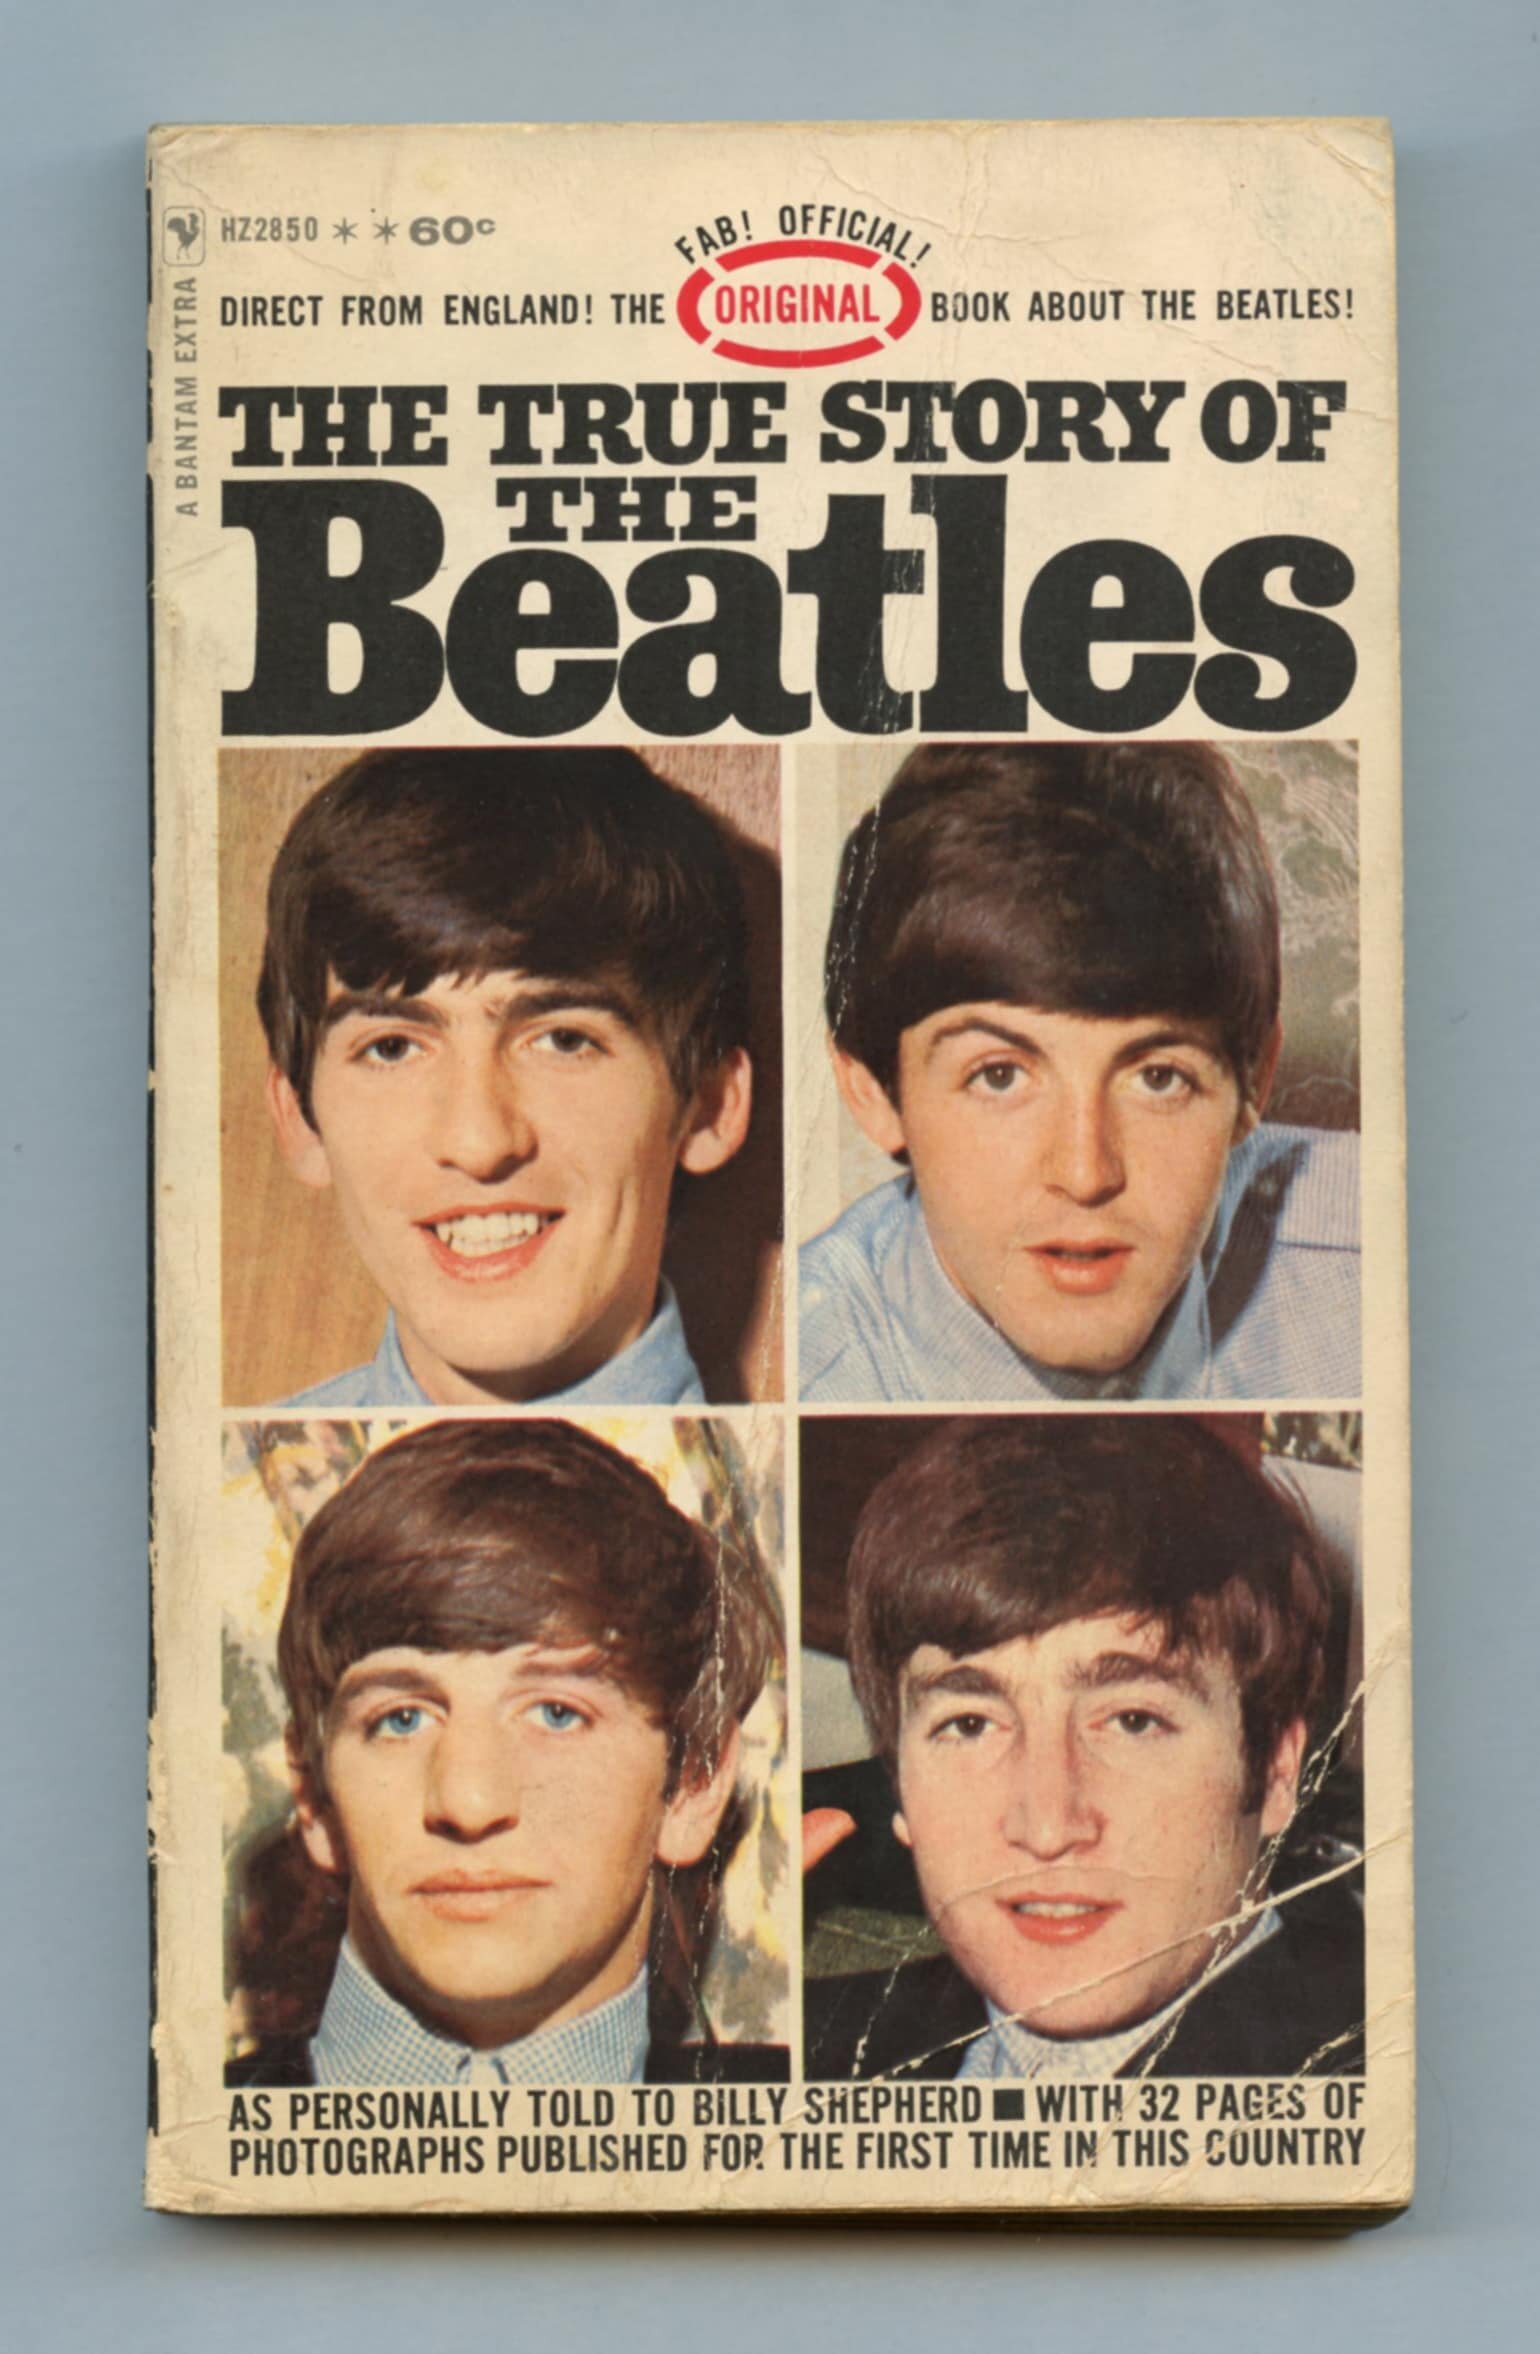 The Beatles Book  The True Story of The Beatles 1964 Paperback Bantam Extra HZ2850